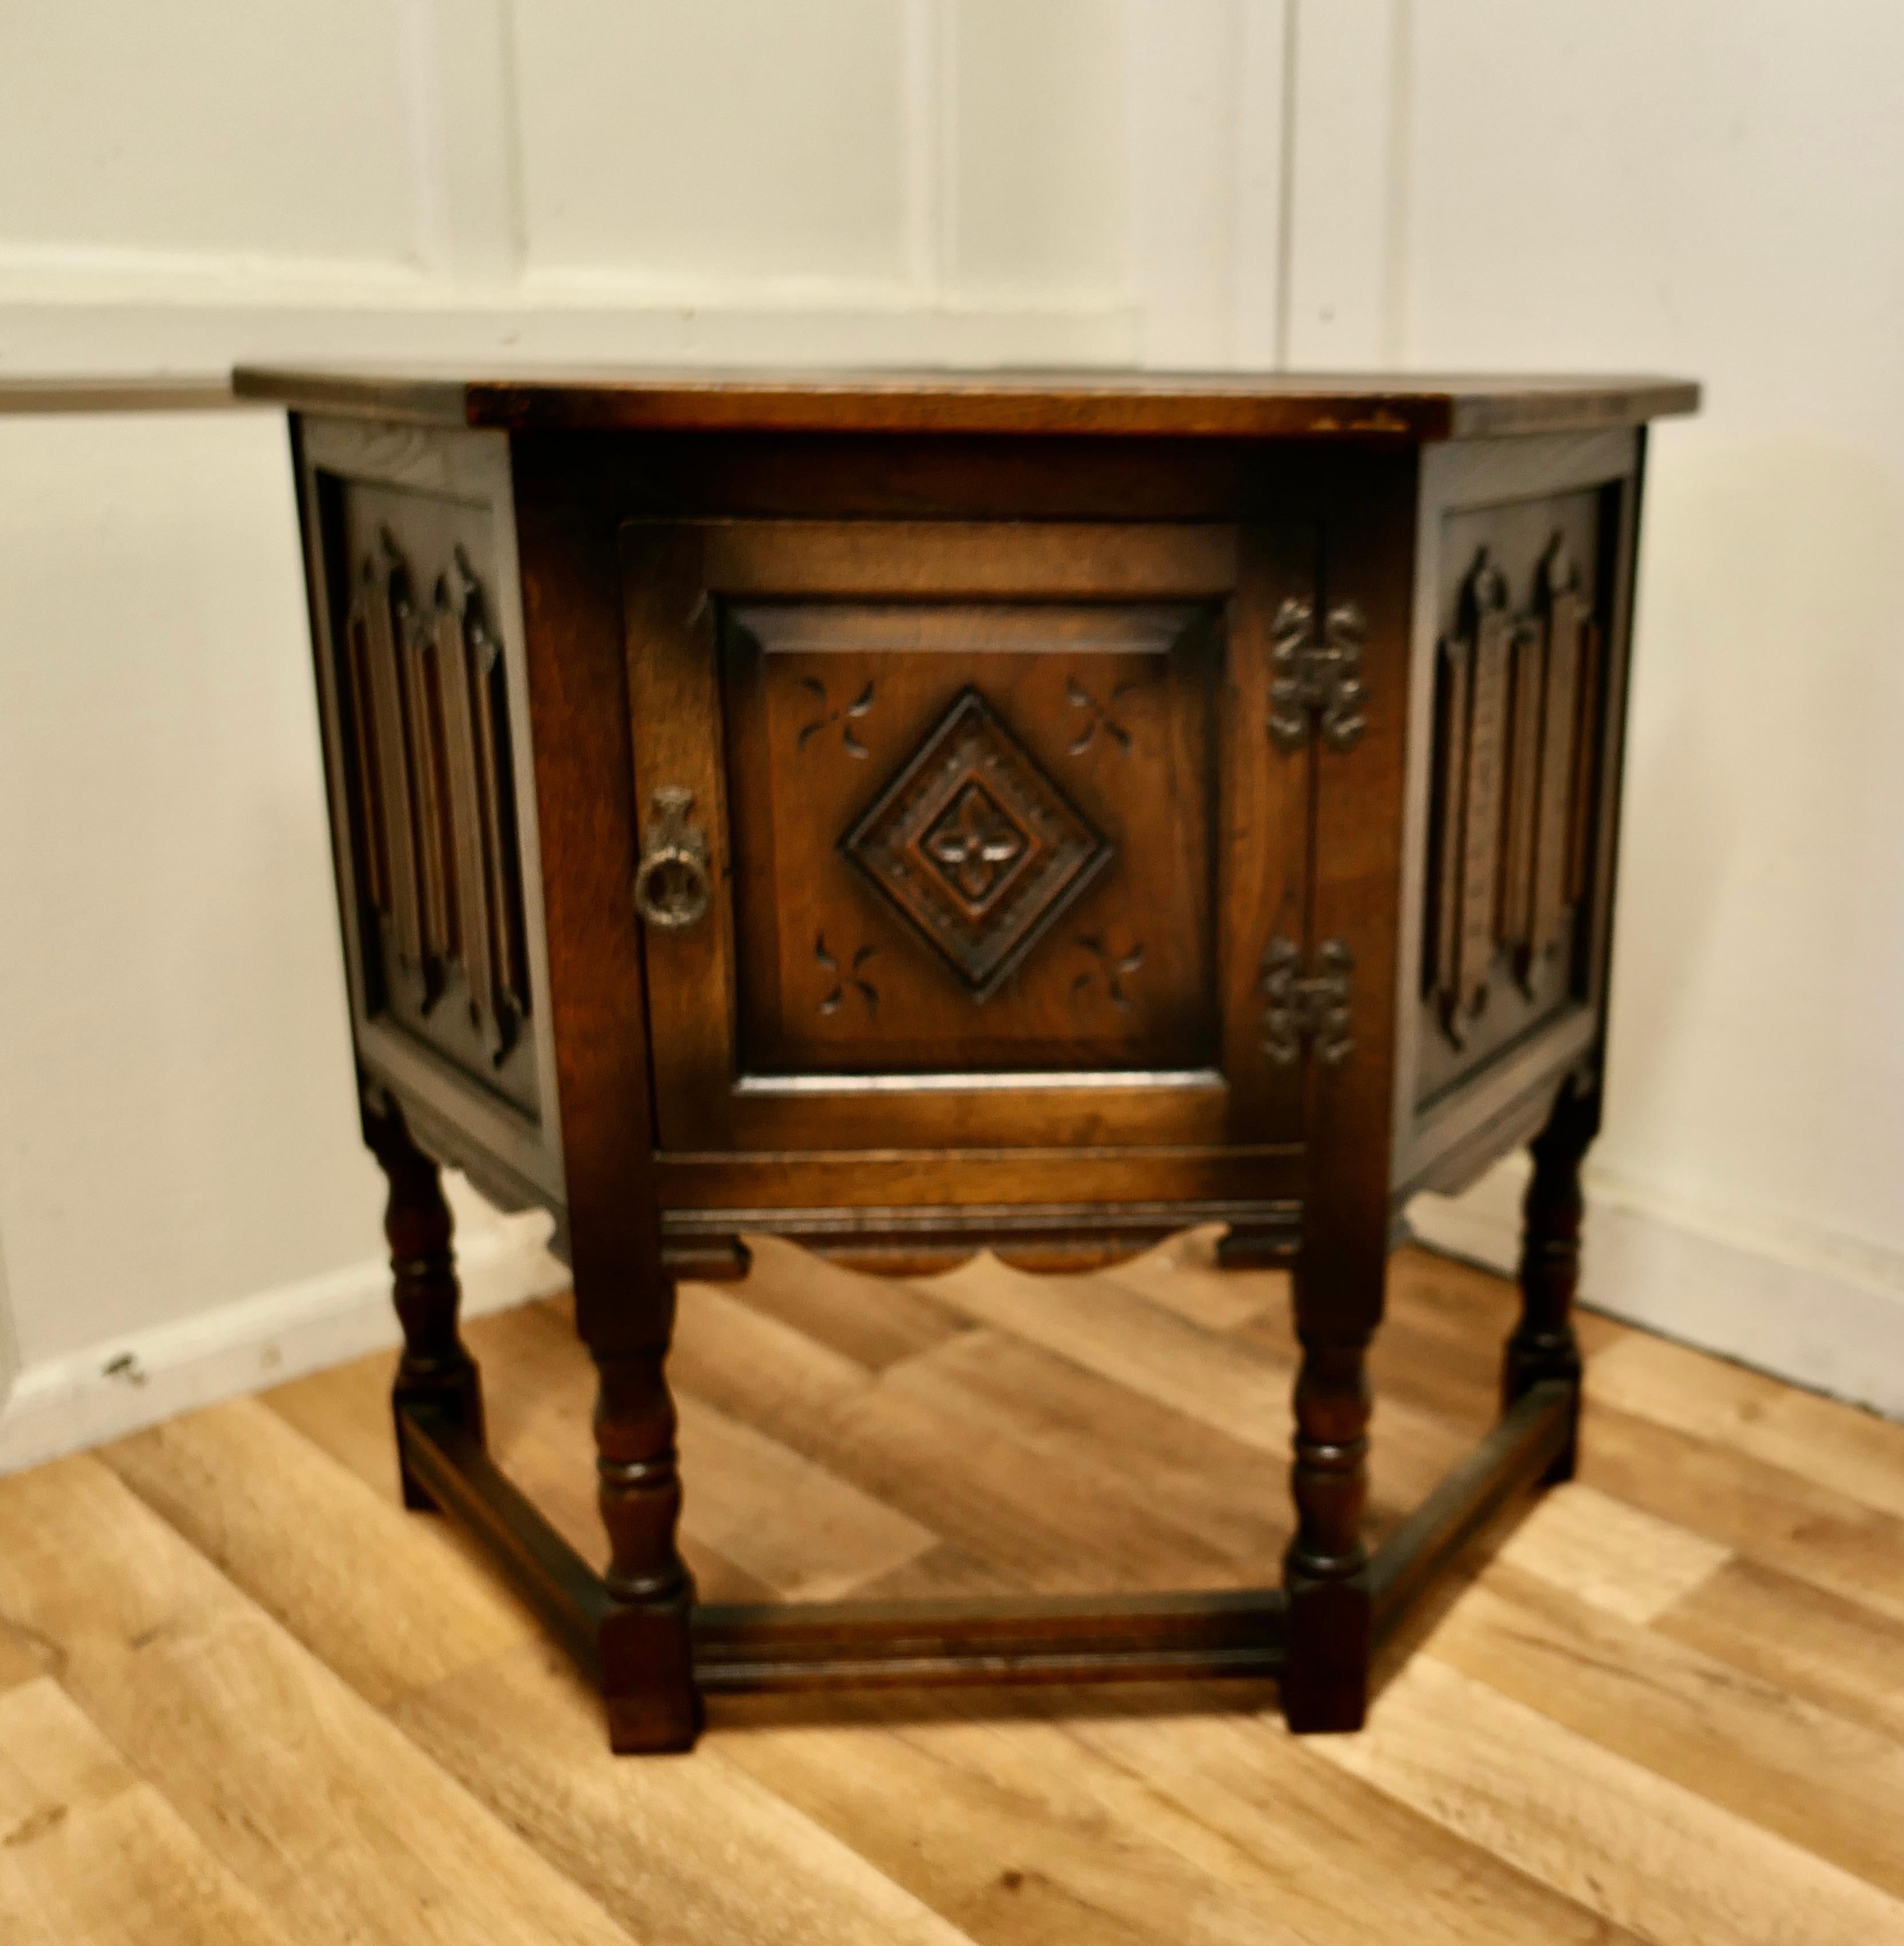 Gothic Carved Oak Credence cupboard by Old Charm

A Charming little piece dating from about 1920, the cabinet is known as a credence cupboard as it has such an unusual shape and a single door
The Cupboard is made by Old Charm, a company know for